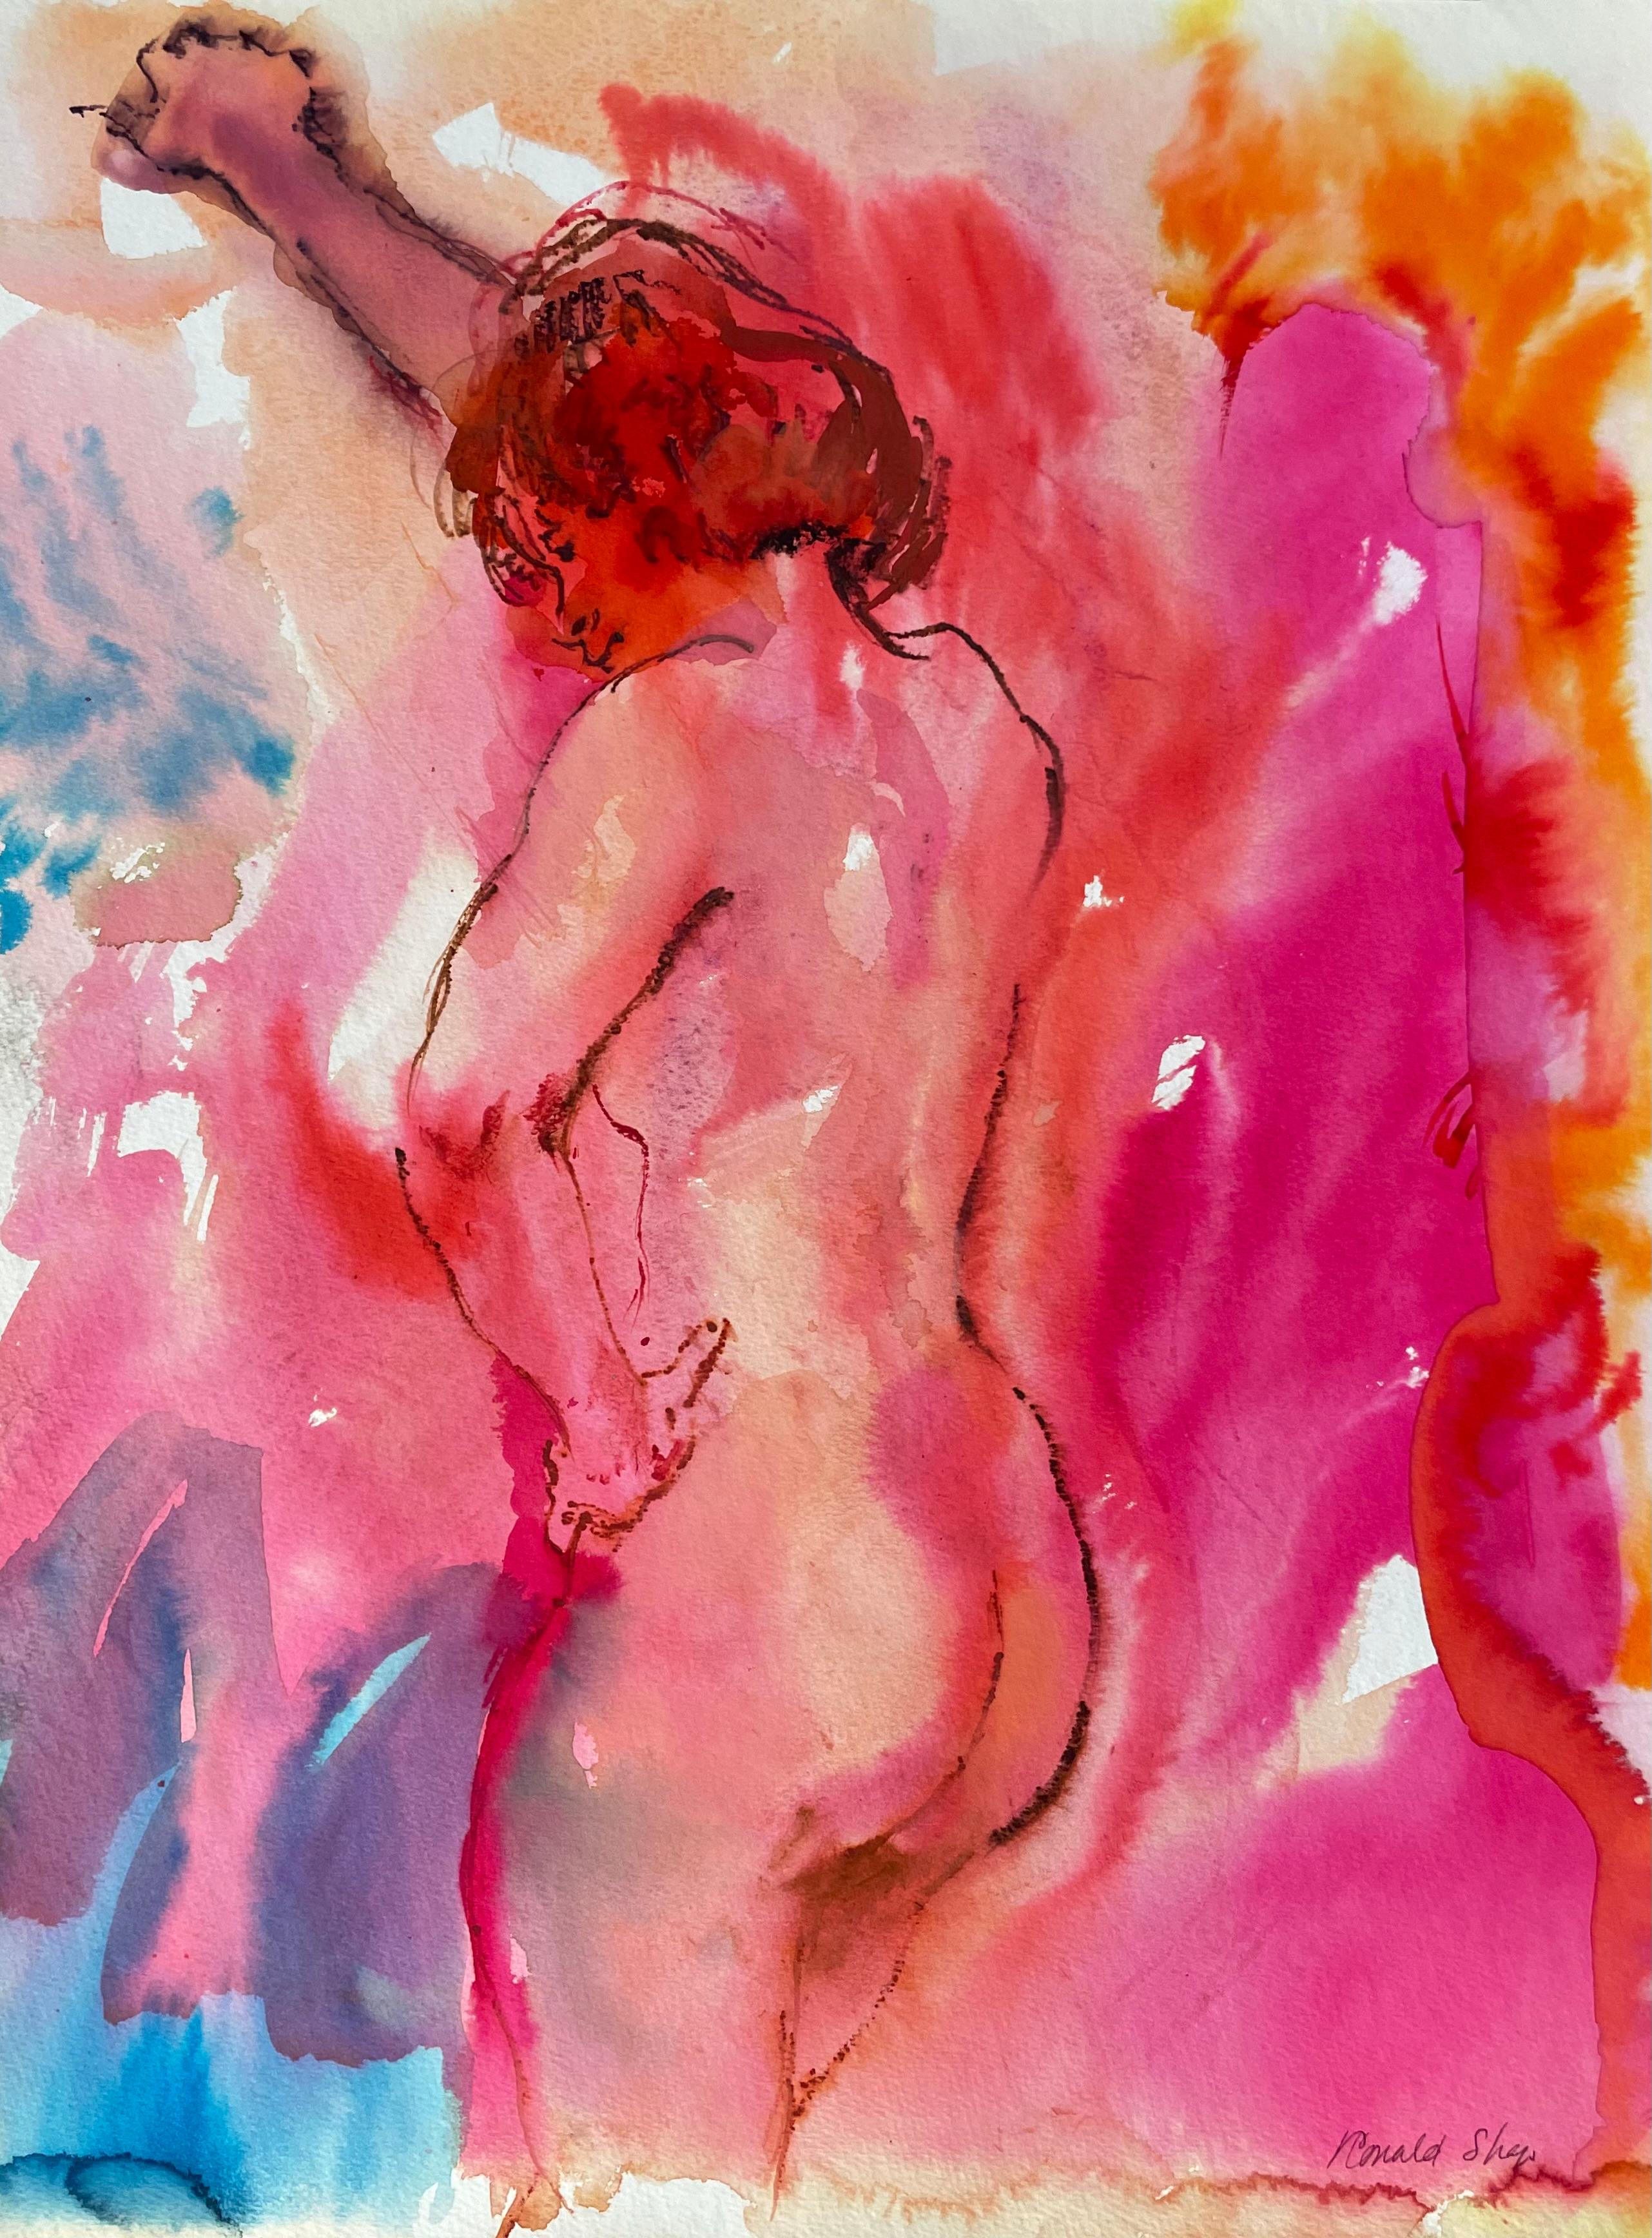 Original ink, gouache and oil pastel figure painting by celebrated, twentieth-century California landscape painter, Ronald Shap. Sketch of nude woman standing in washes of neon pink, orange and blue. 23x18 inches on paper. Signed.

This piece is a